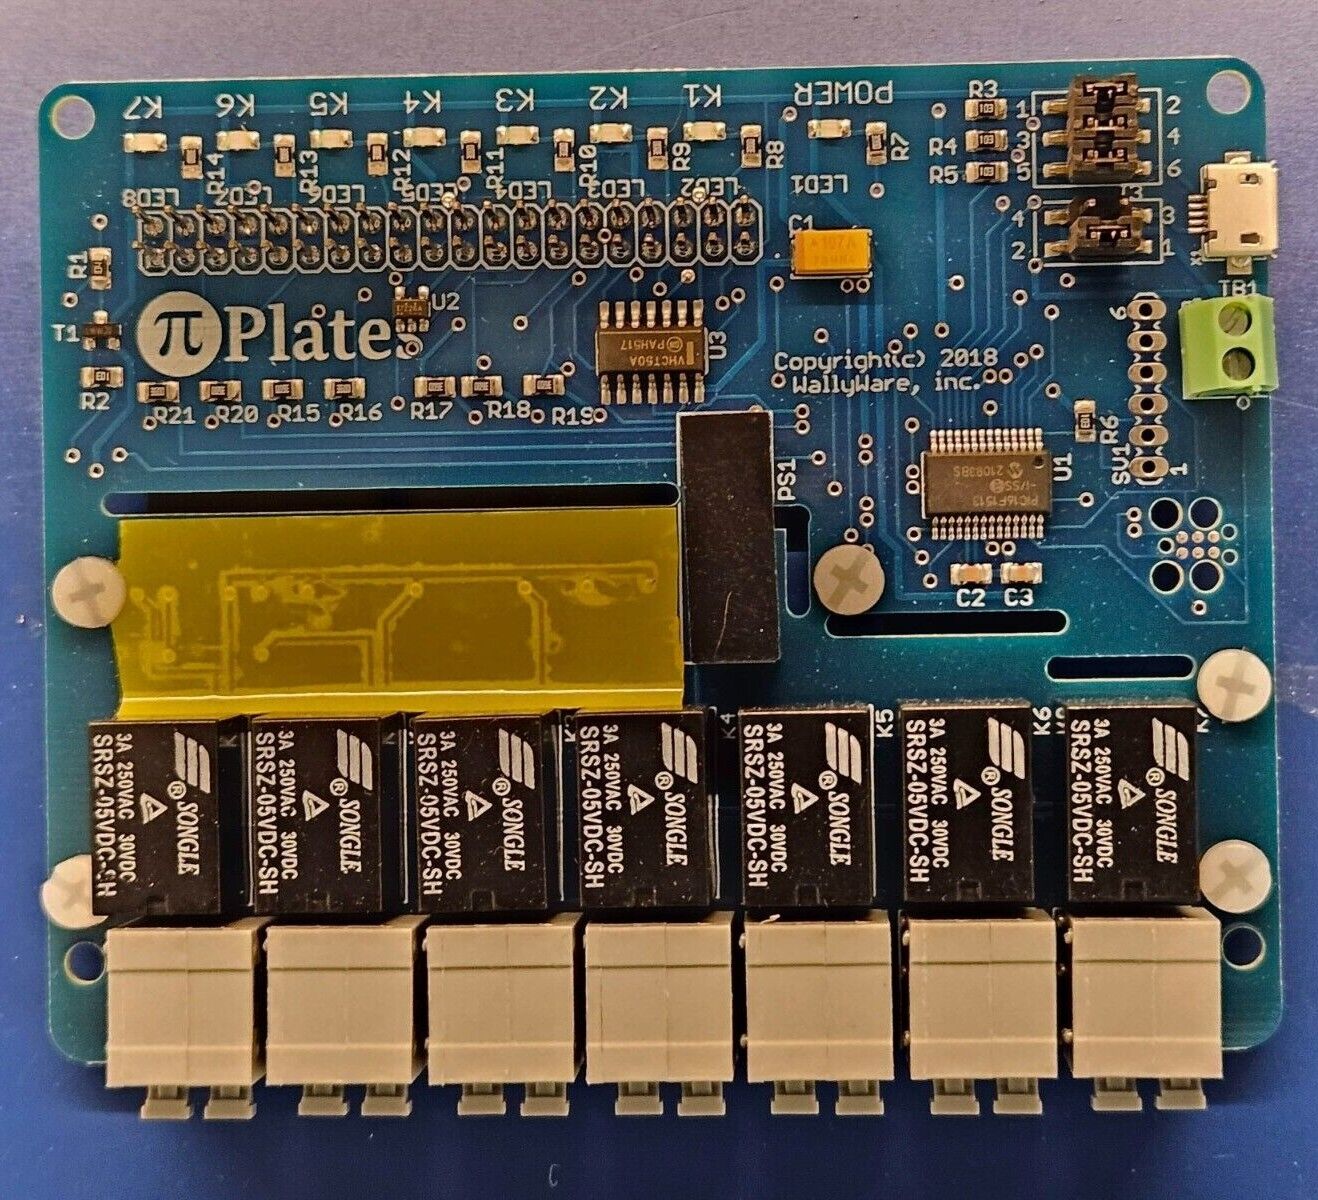 Pi-Plates RELAYplate 7-Channel Relay Module HAT for RPi Raspberry Pi